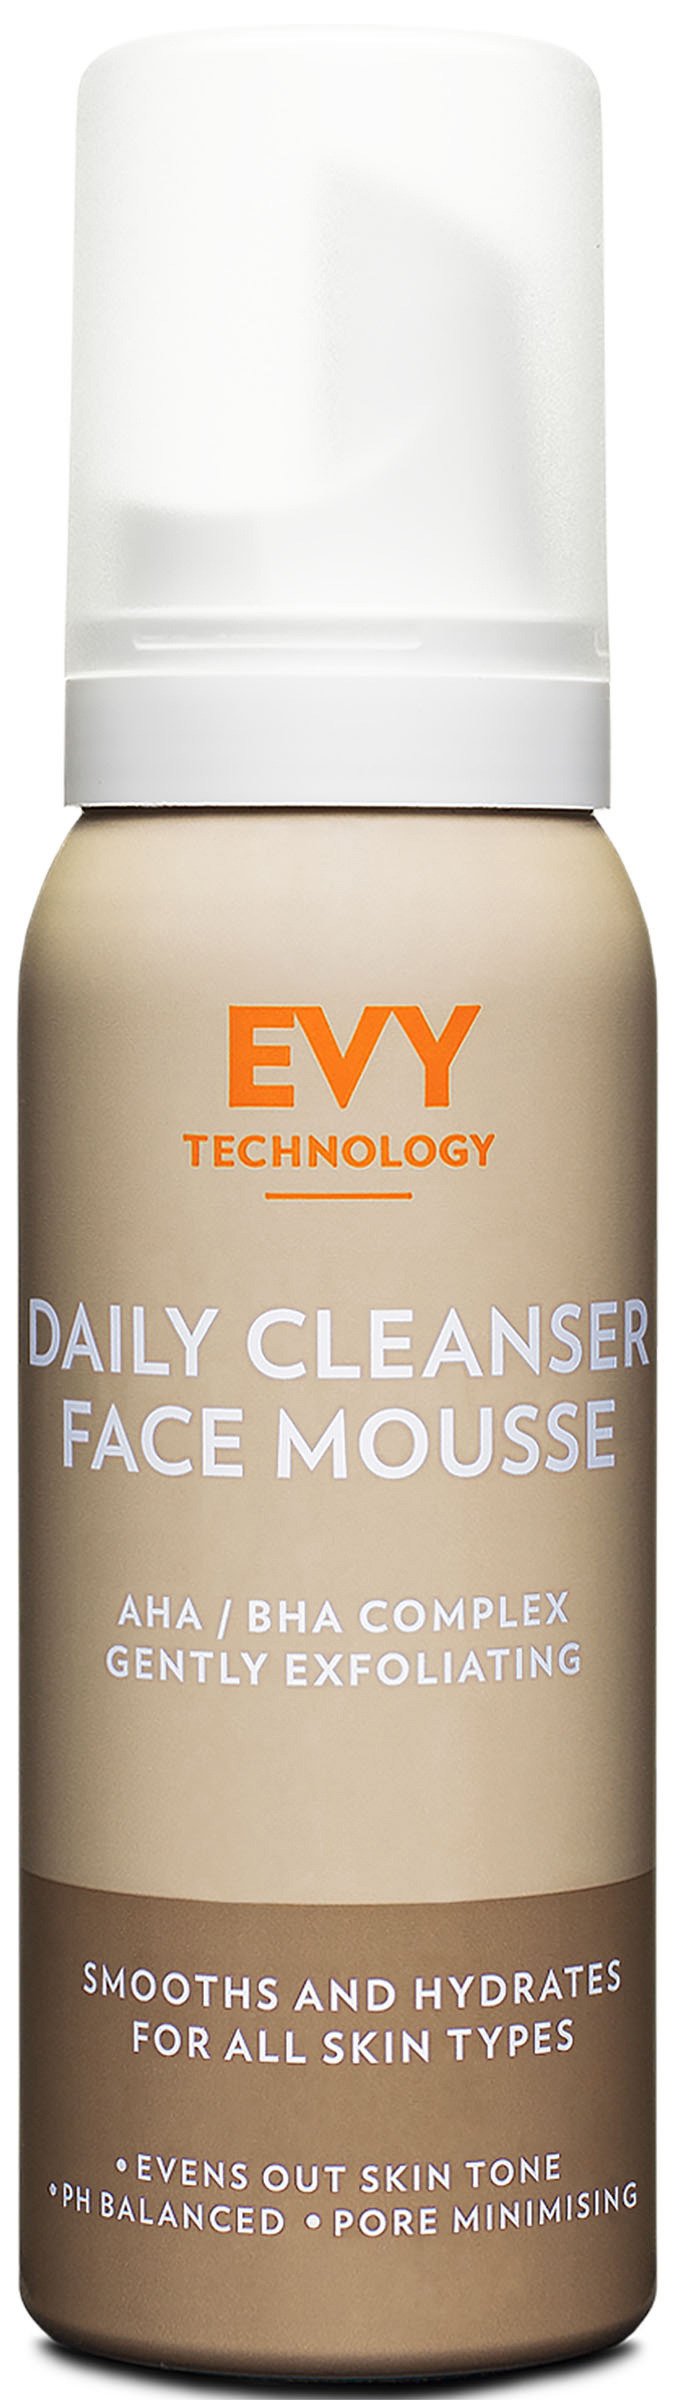 Evy Daily Cleanser Face Mousse 100 ml